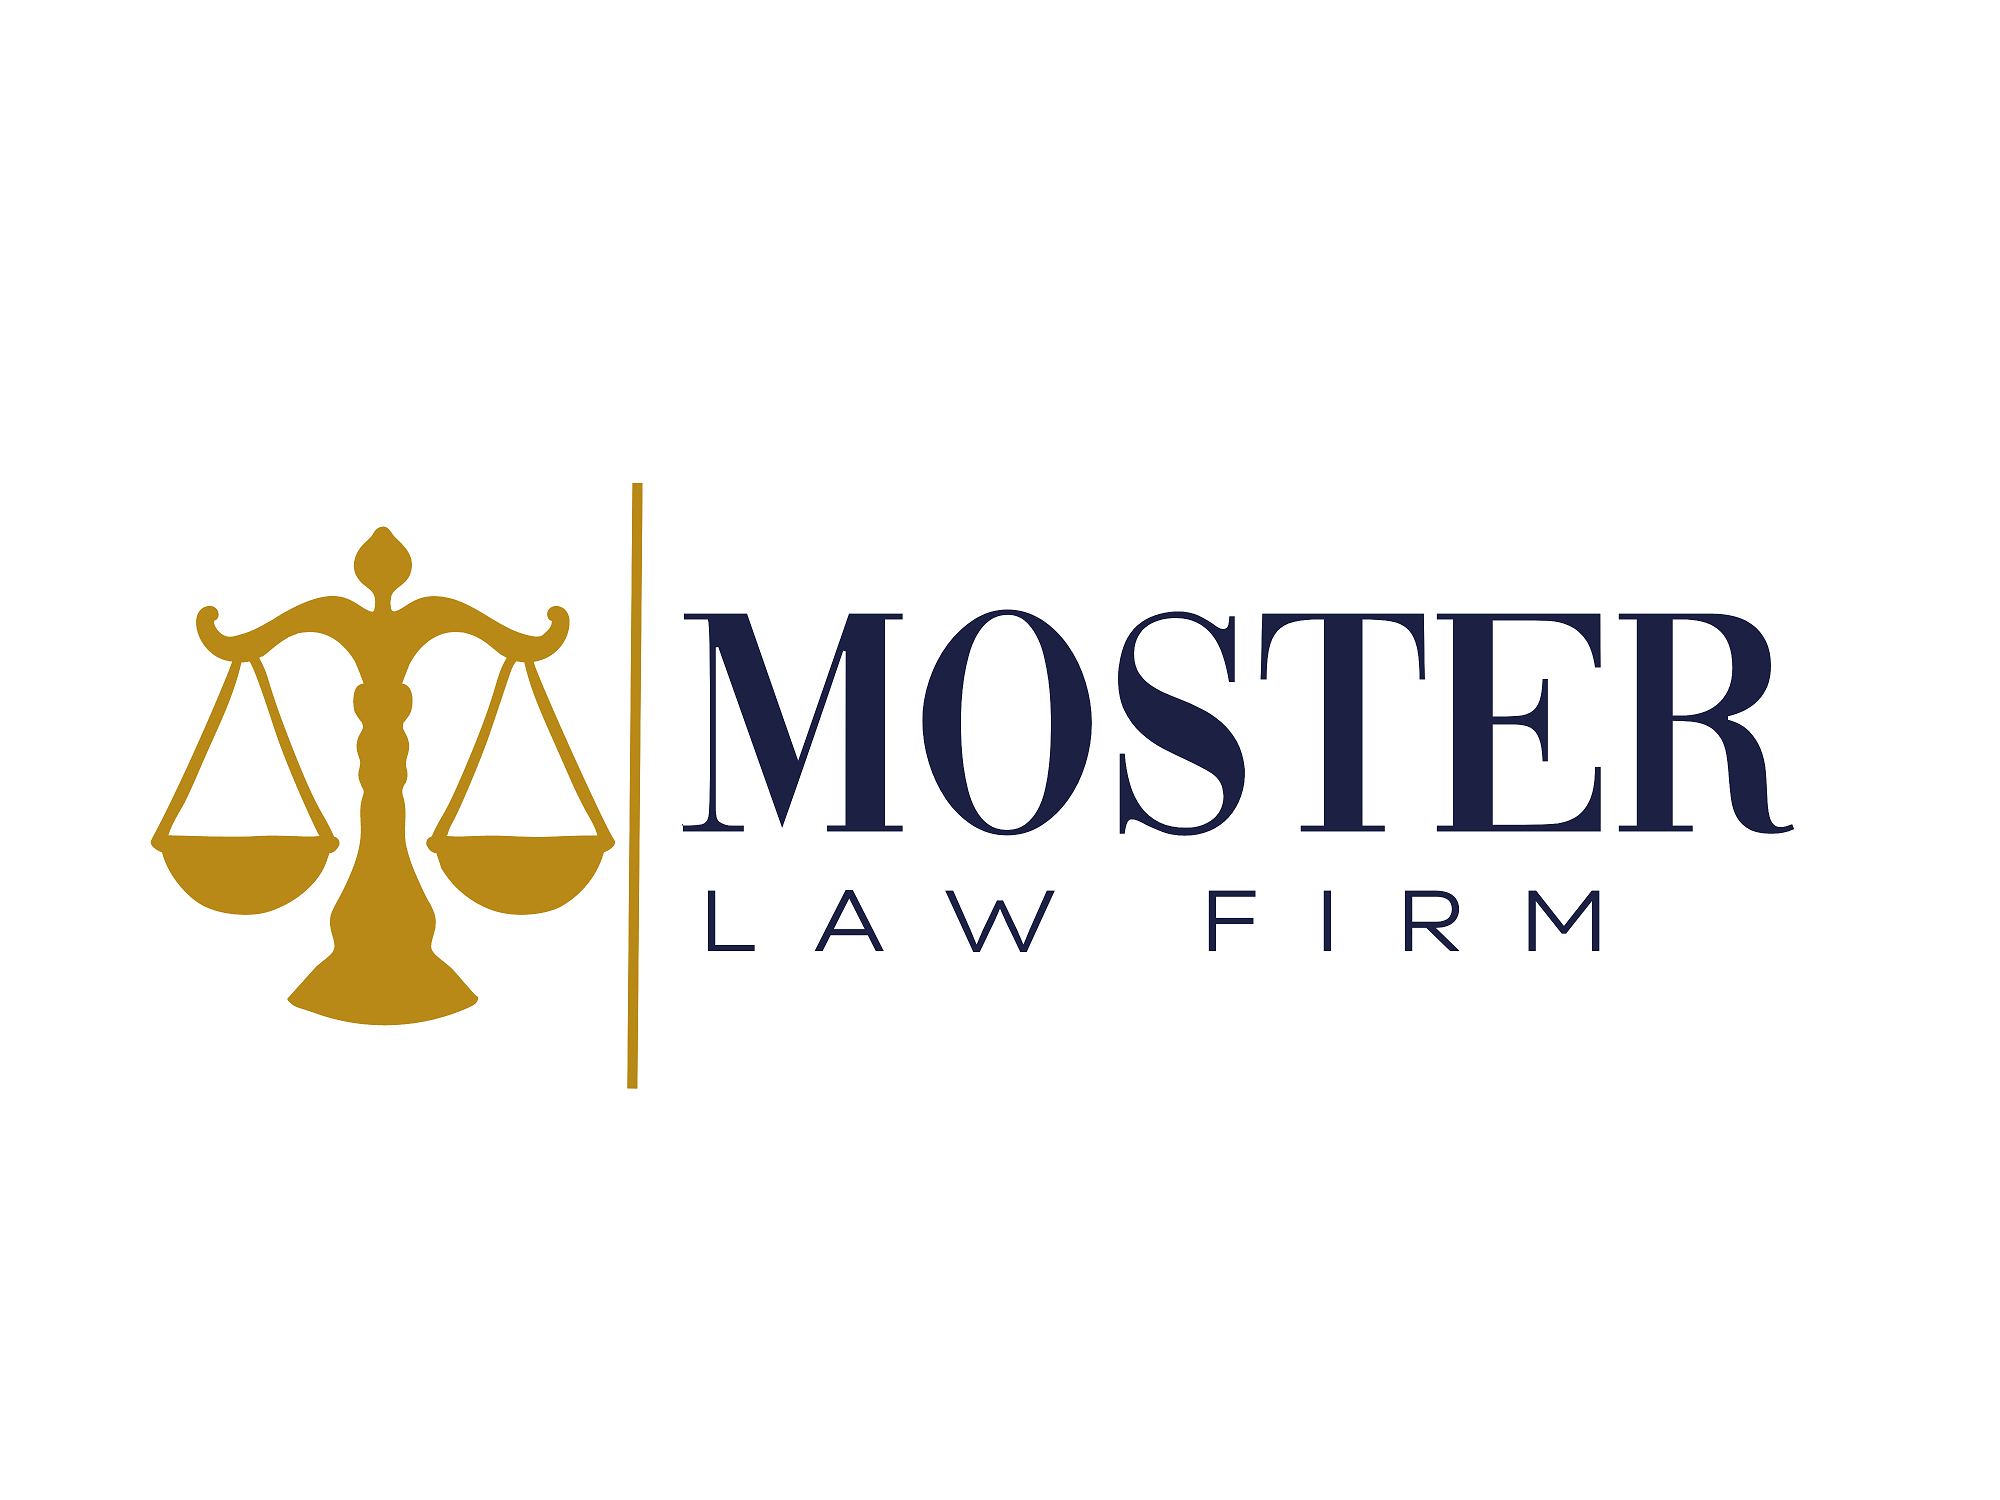 The Moster Law Firm